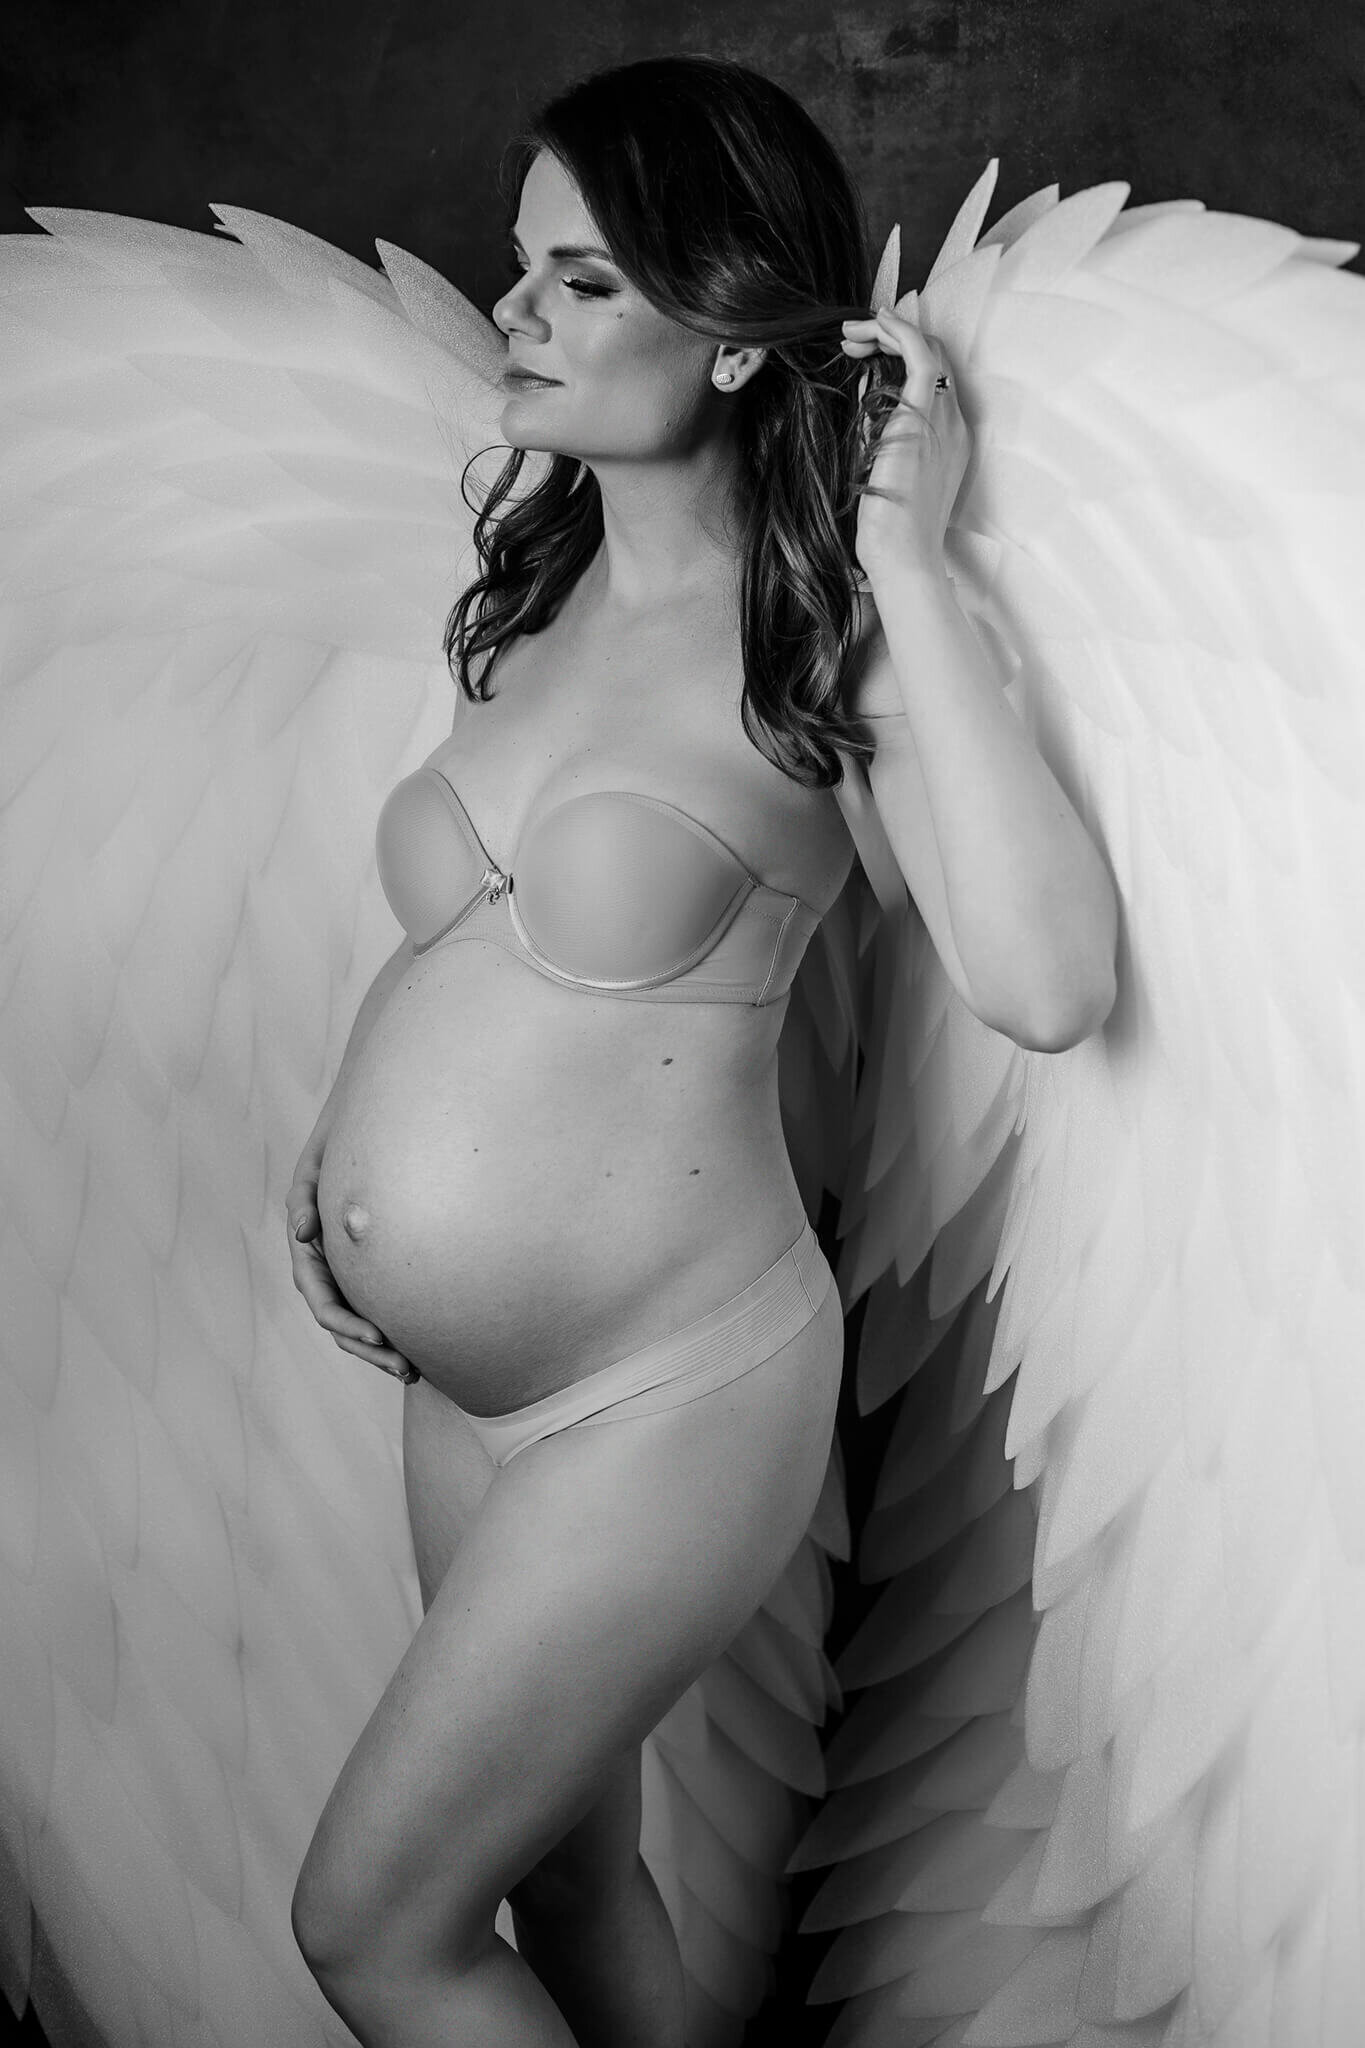 Maternity photo in black and white, she is wearing white wings which makes a romantic mom to be picture